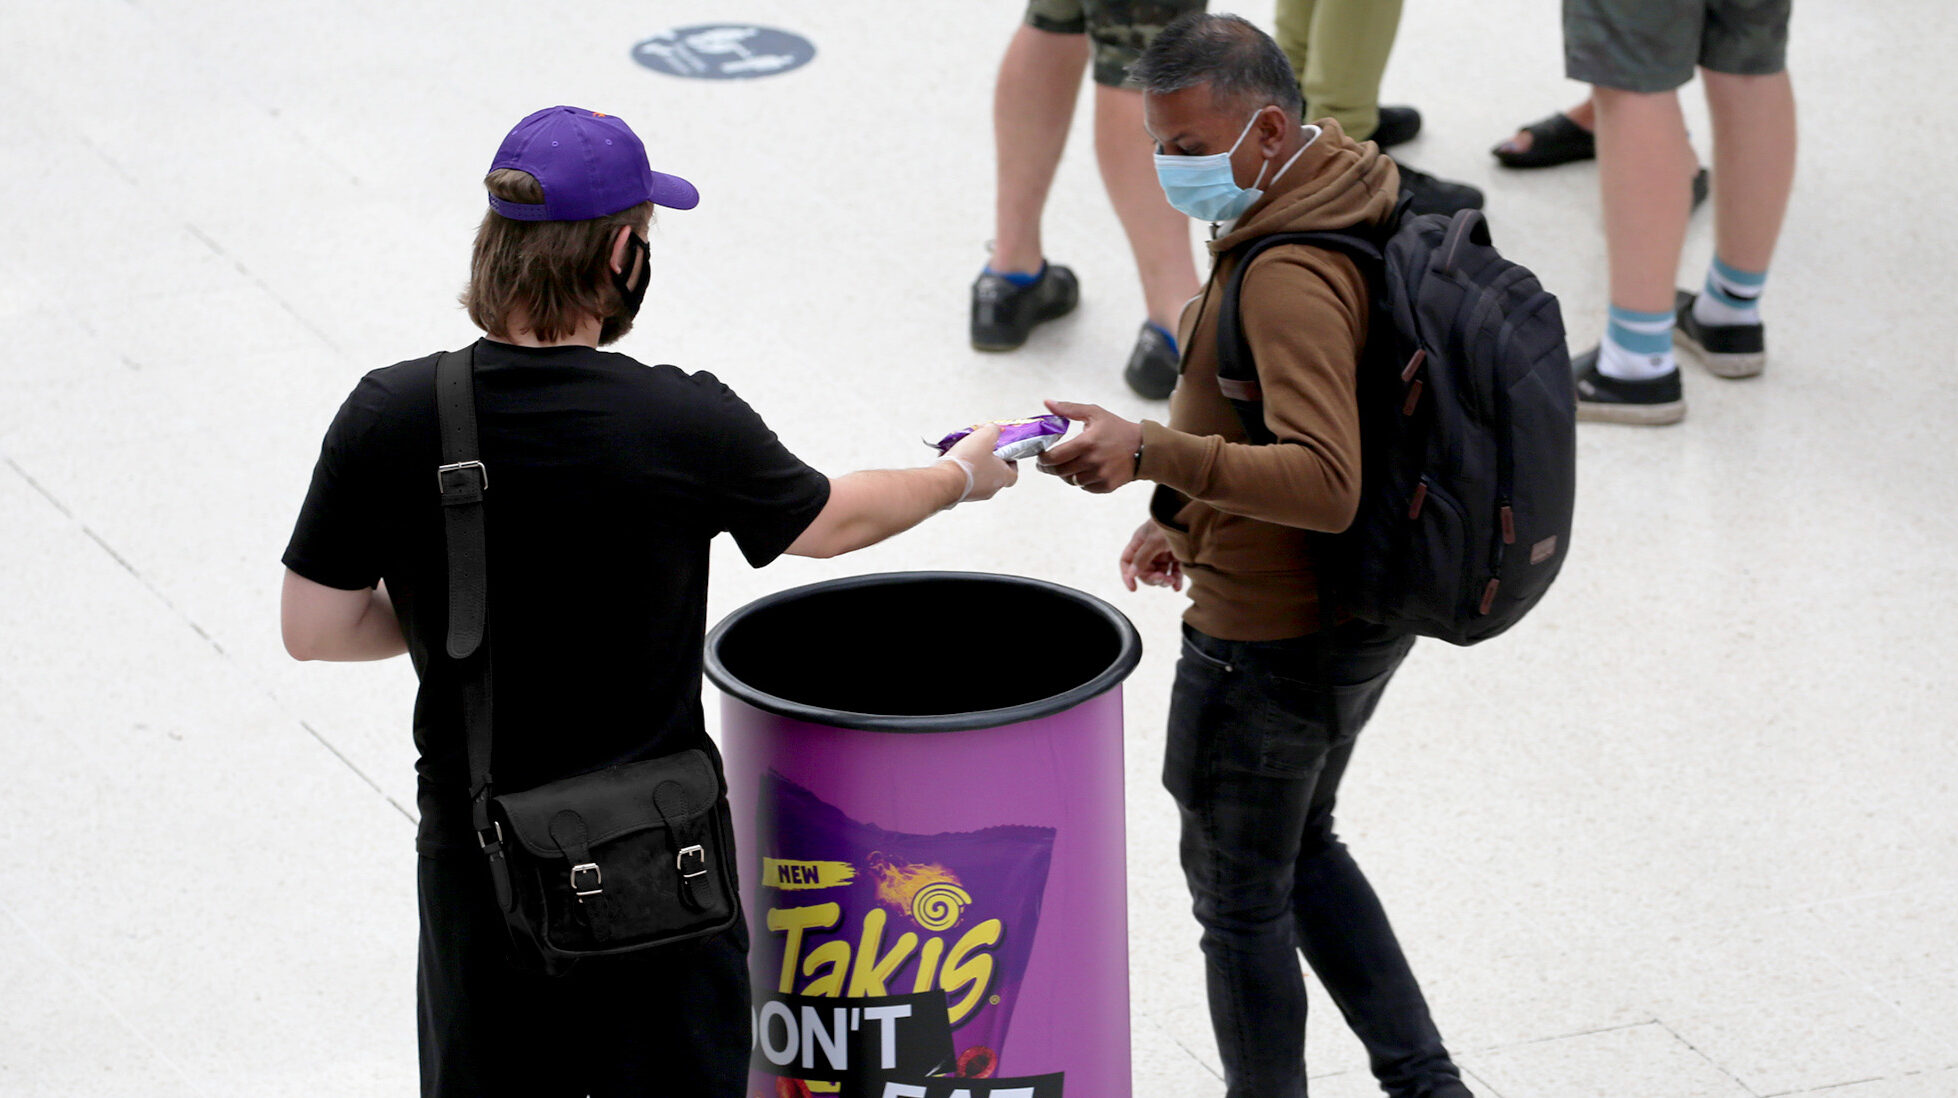 Takis Experiential staff handing out a sample to commuters